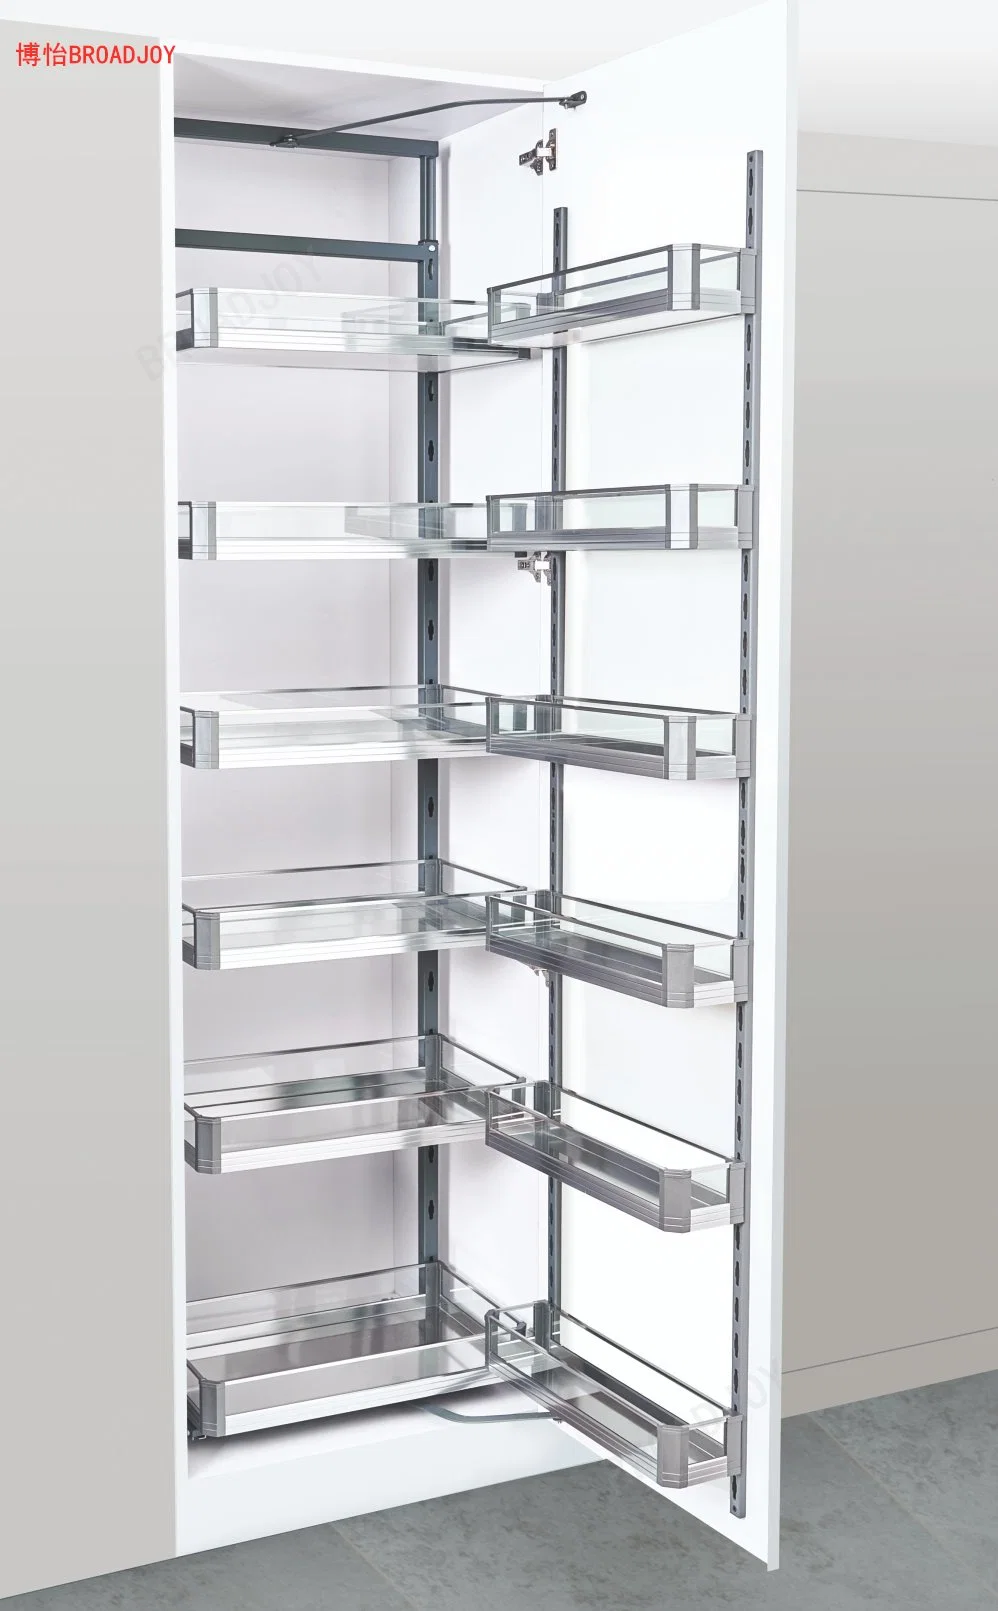 Tall Units Glass Pantry Unit Larder Kitchen Cabinet Soft Closing Pull out Basket Food Snack Sundries Drinks Bottle Basket Storage Organizer Tall Unit in Kitchen